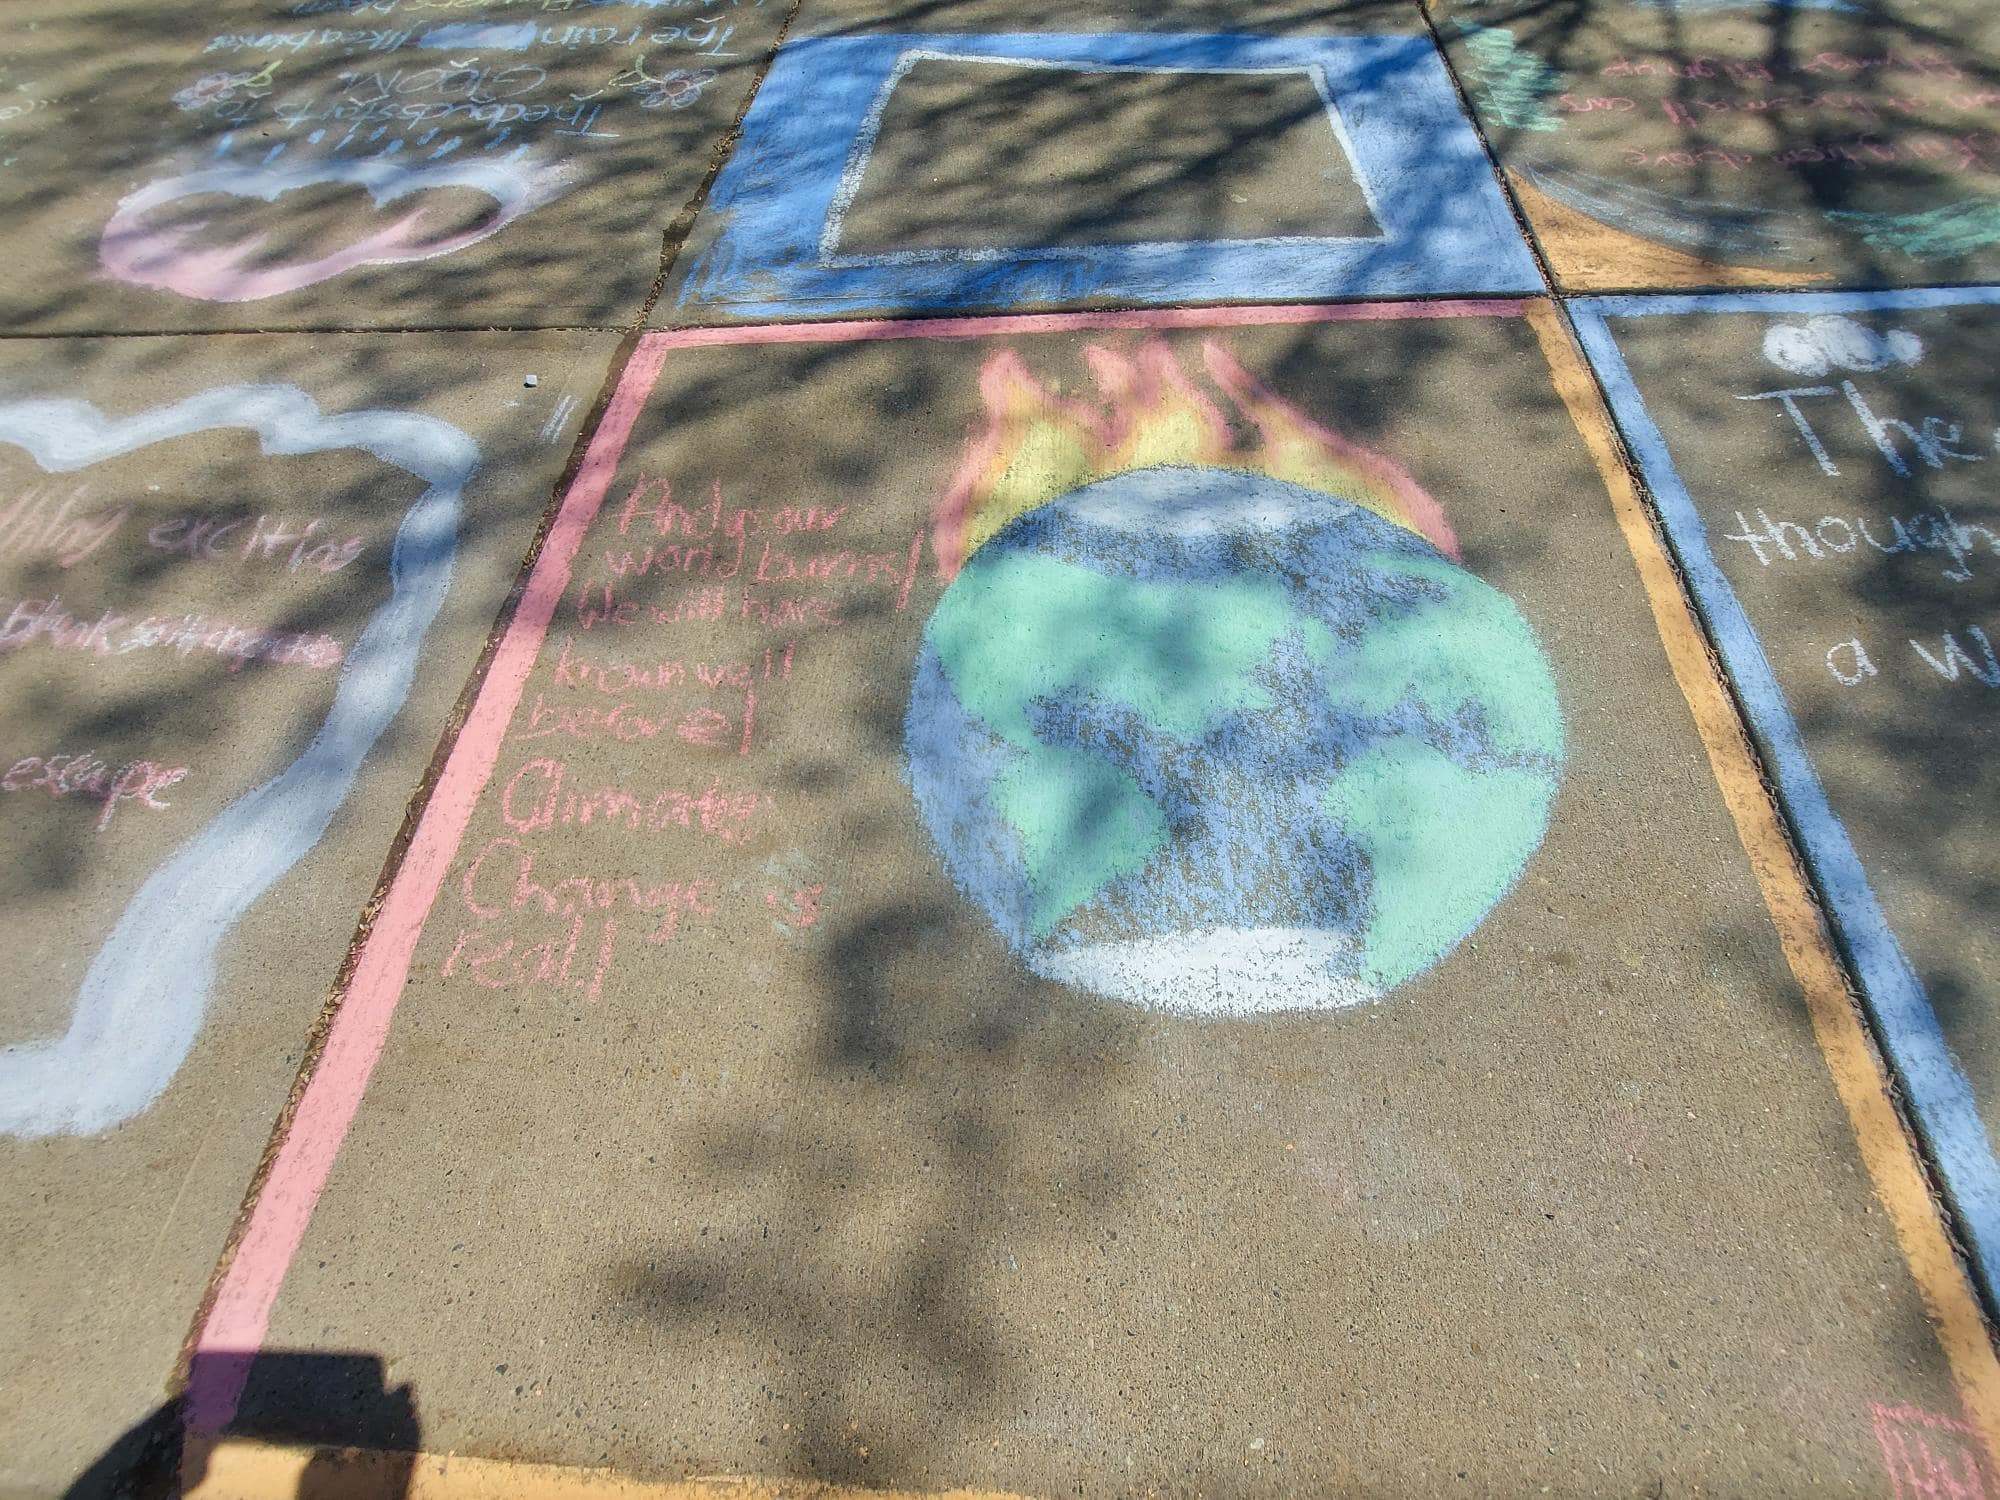 Whitcomb students study poetry with chalk haiku illustrations